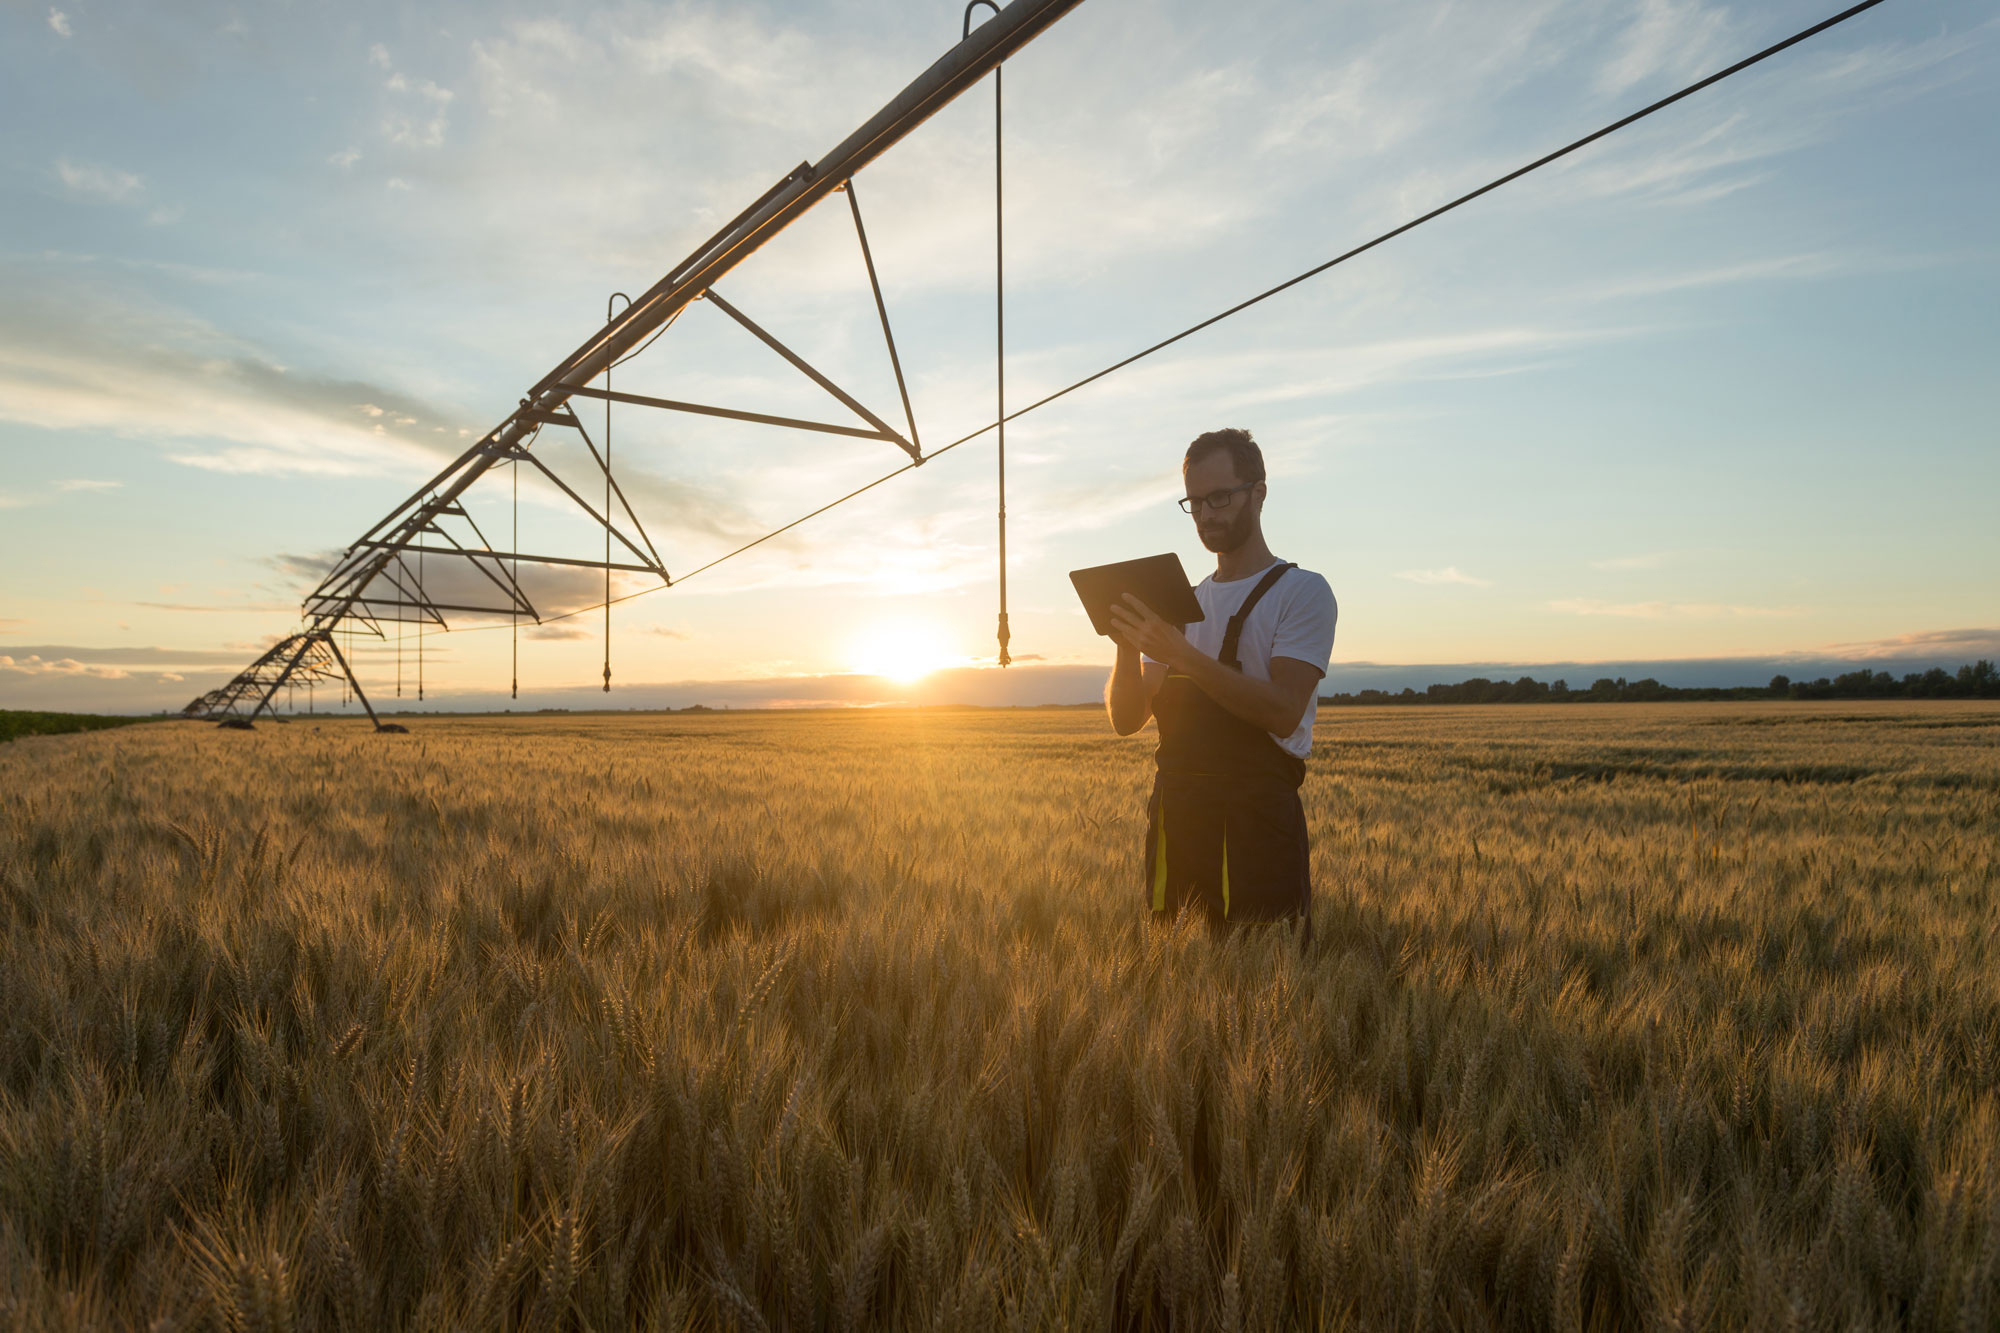 photo - Farmer Or Agronomist Standing In Wheat Field Beneath Irrigation System